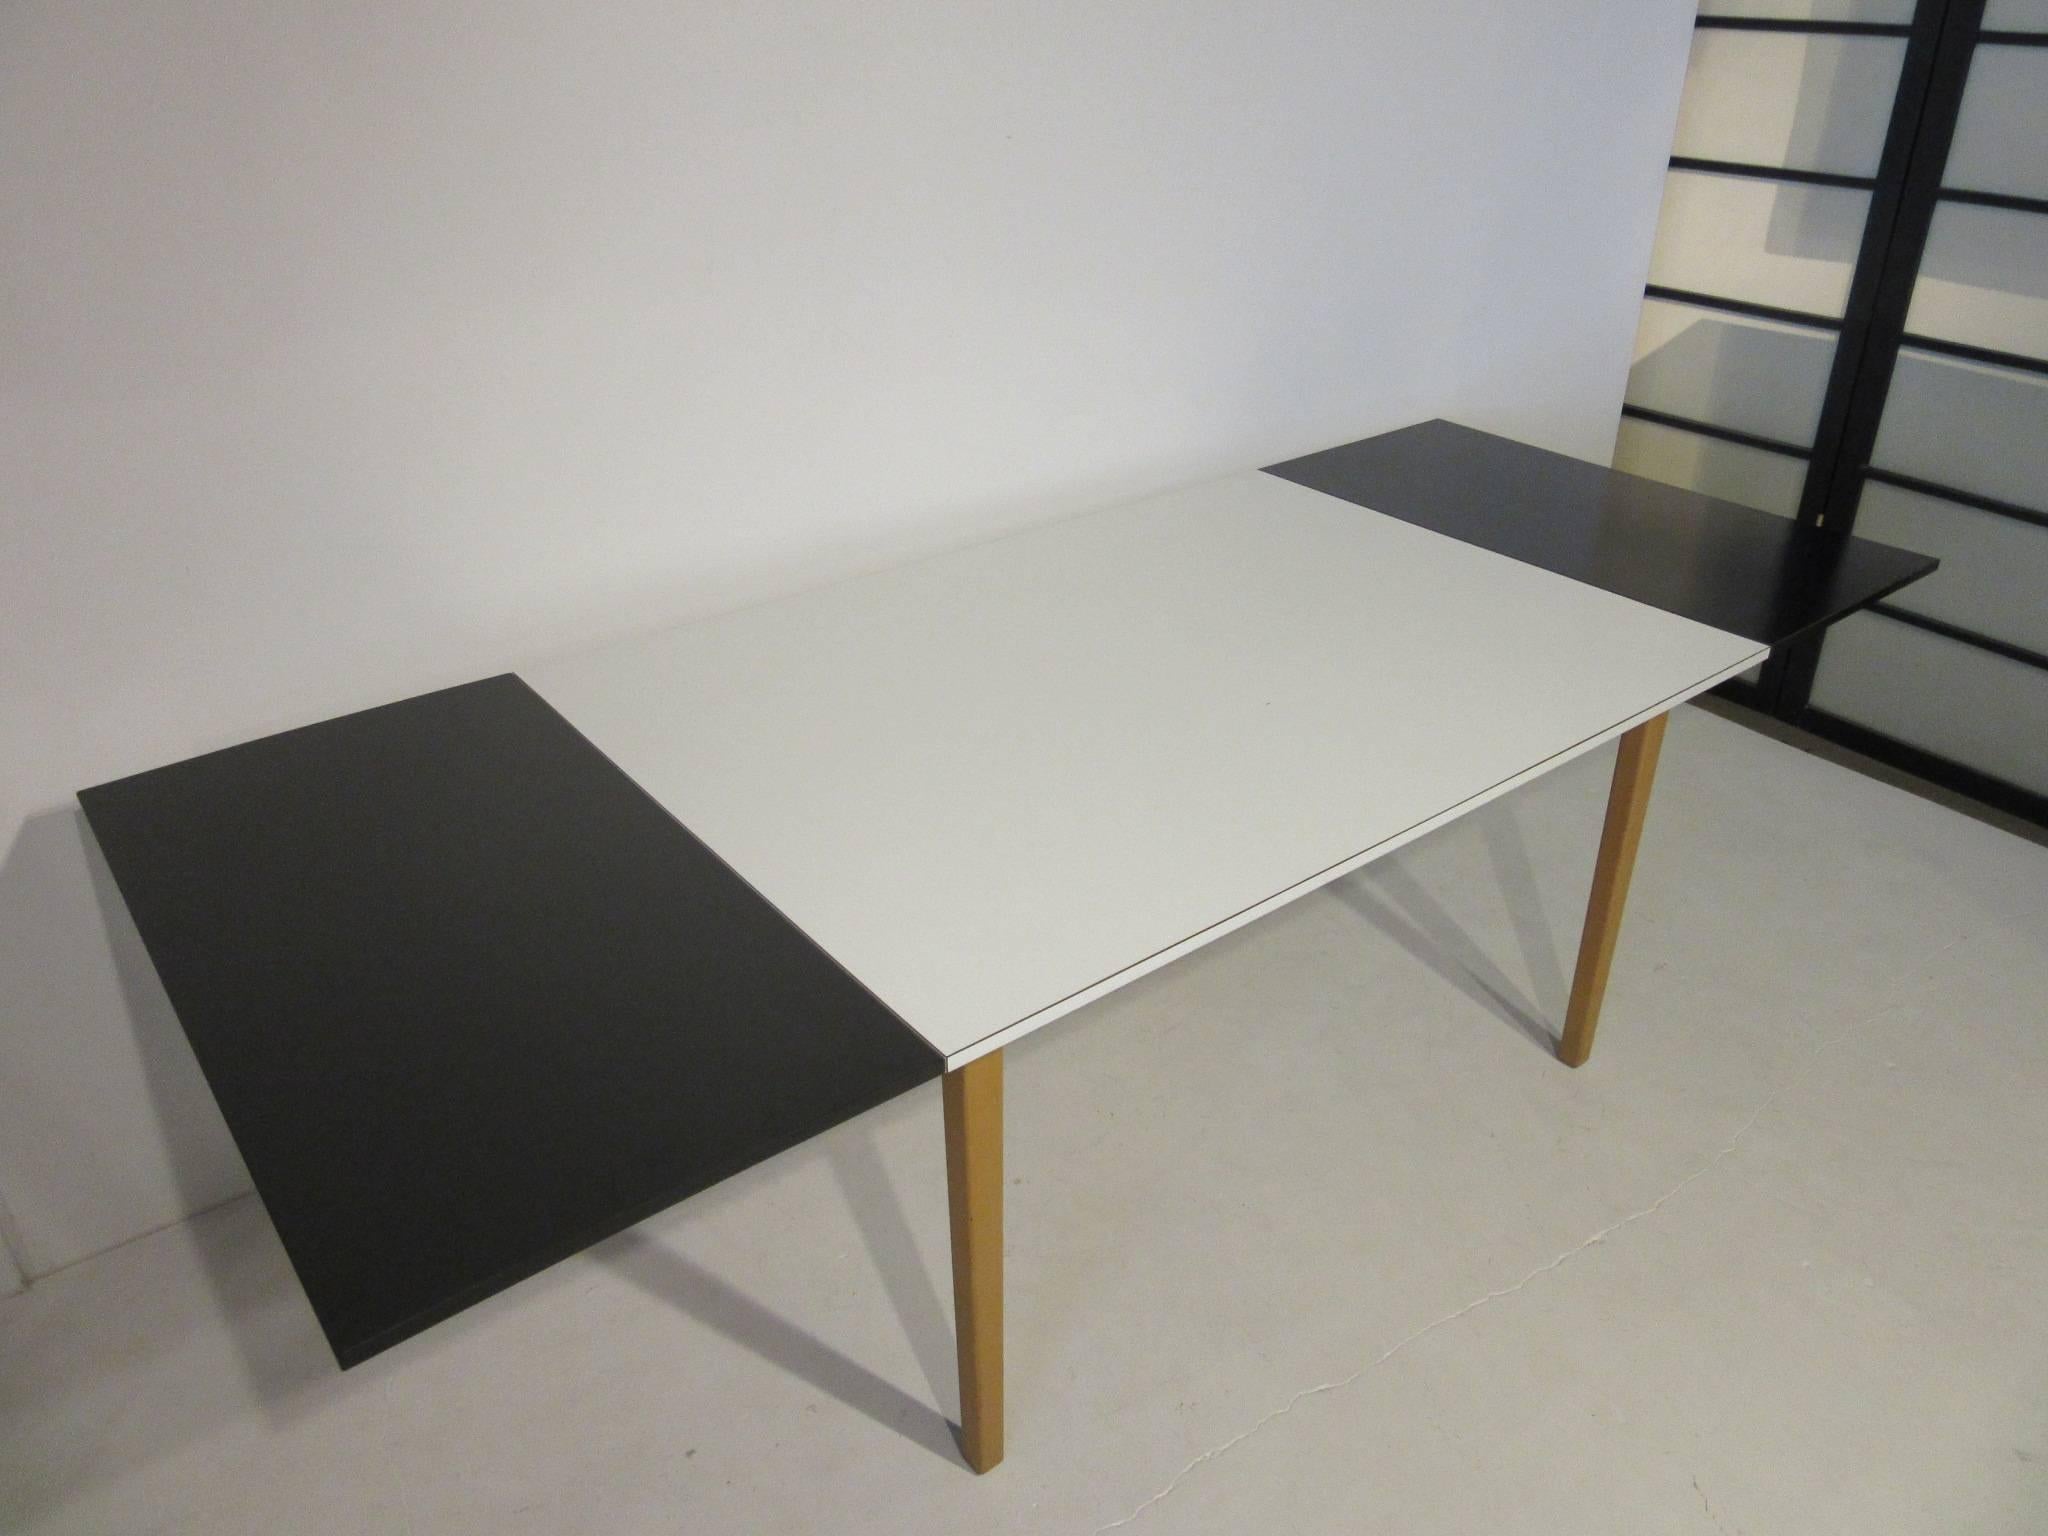 A hard to find and rare Knoll & Drake black and white laminate extension dining table with two black slip in end leaves. The base is a natural colored maple wood with two shallow pull-out drawers to each end for silverware or linens. Designed by